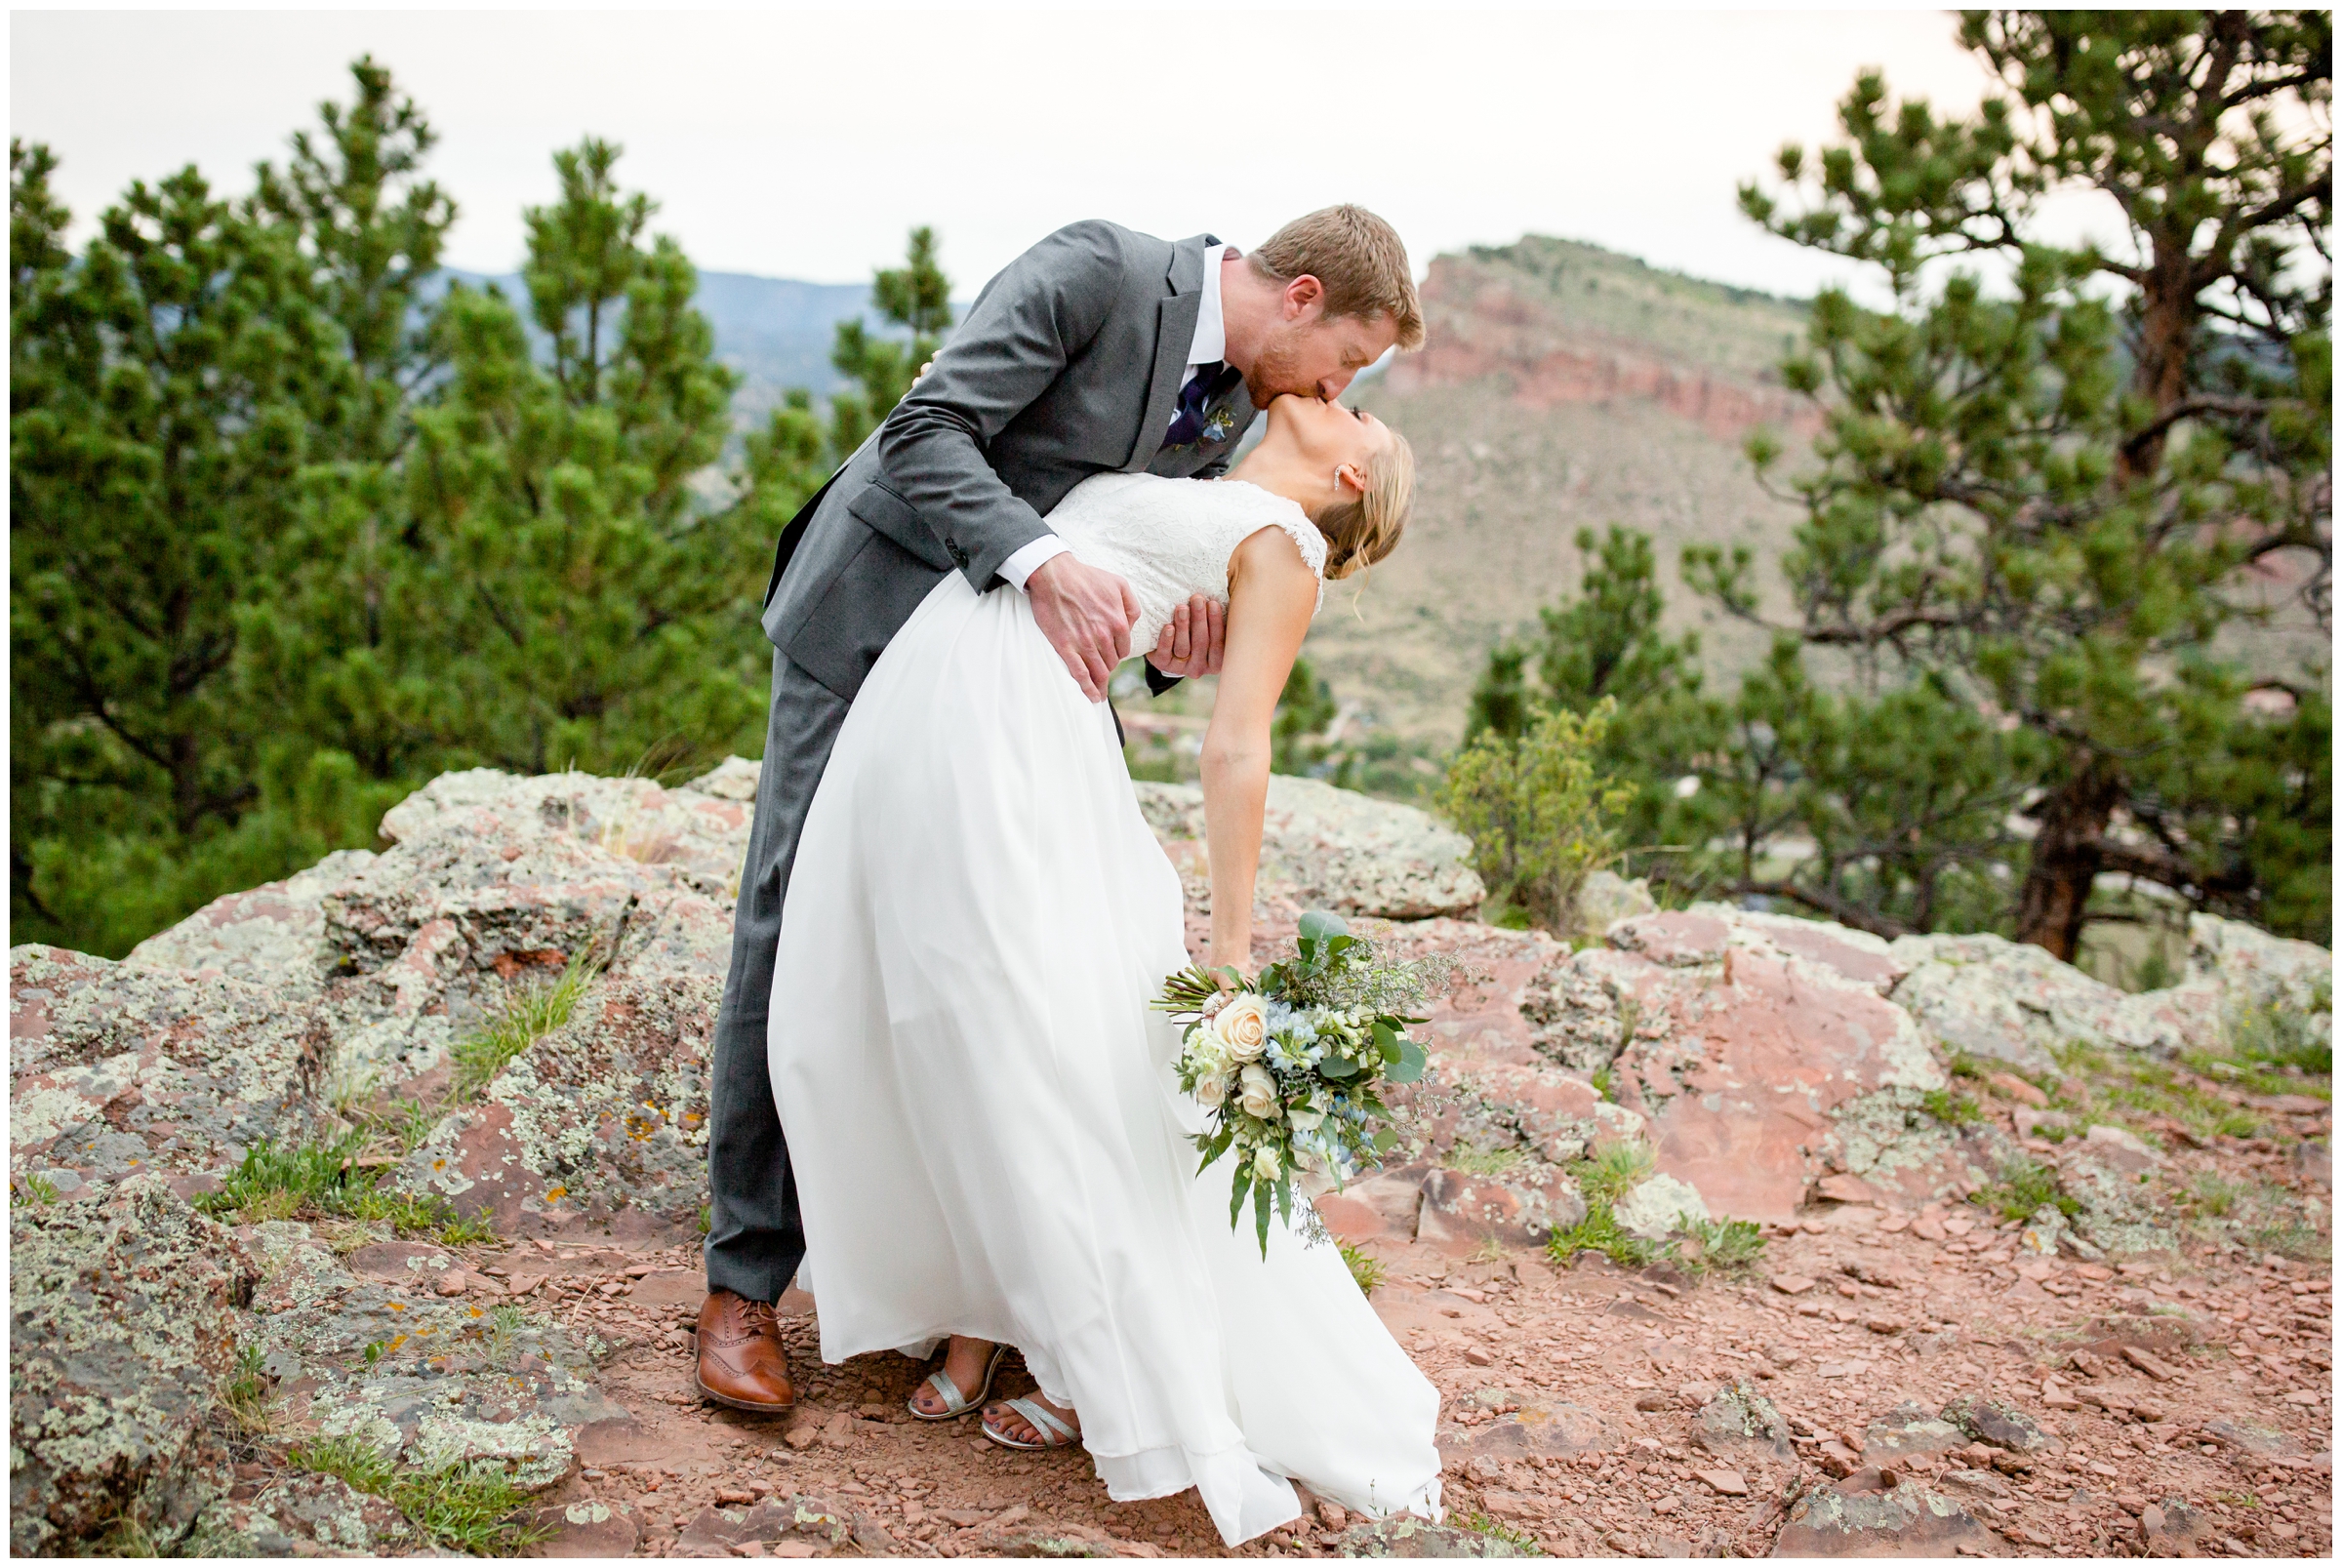 Summer mountain wedding at Lionscrest Manor by Lyons Colorado photographer Plum Pretty Photography